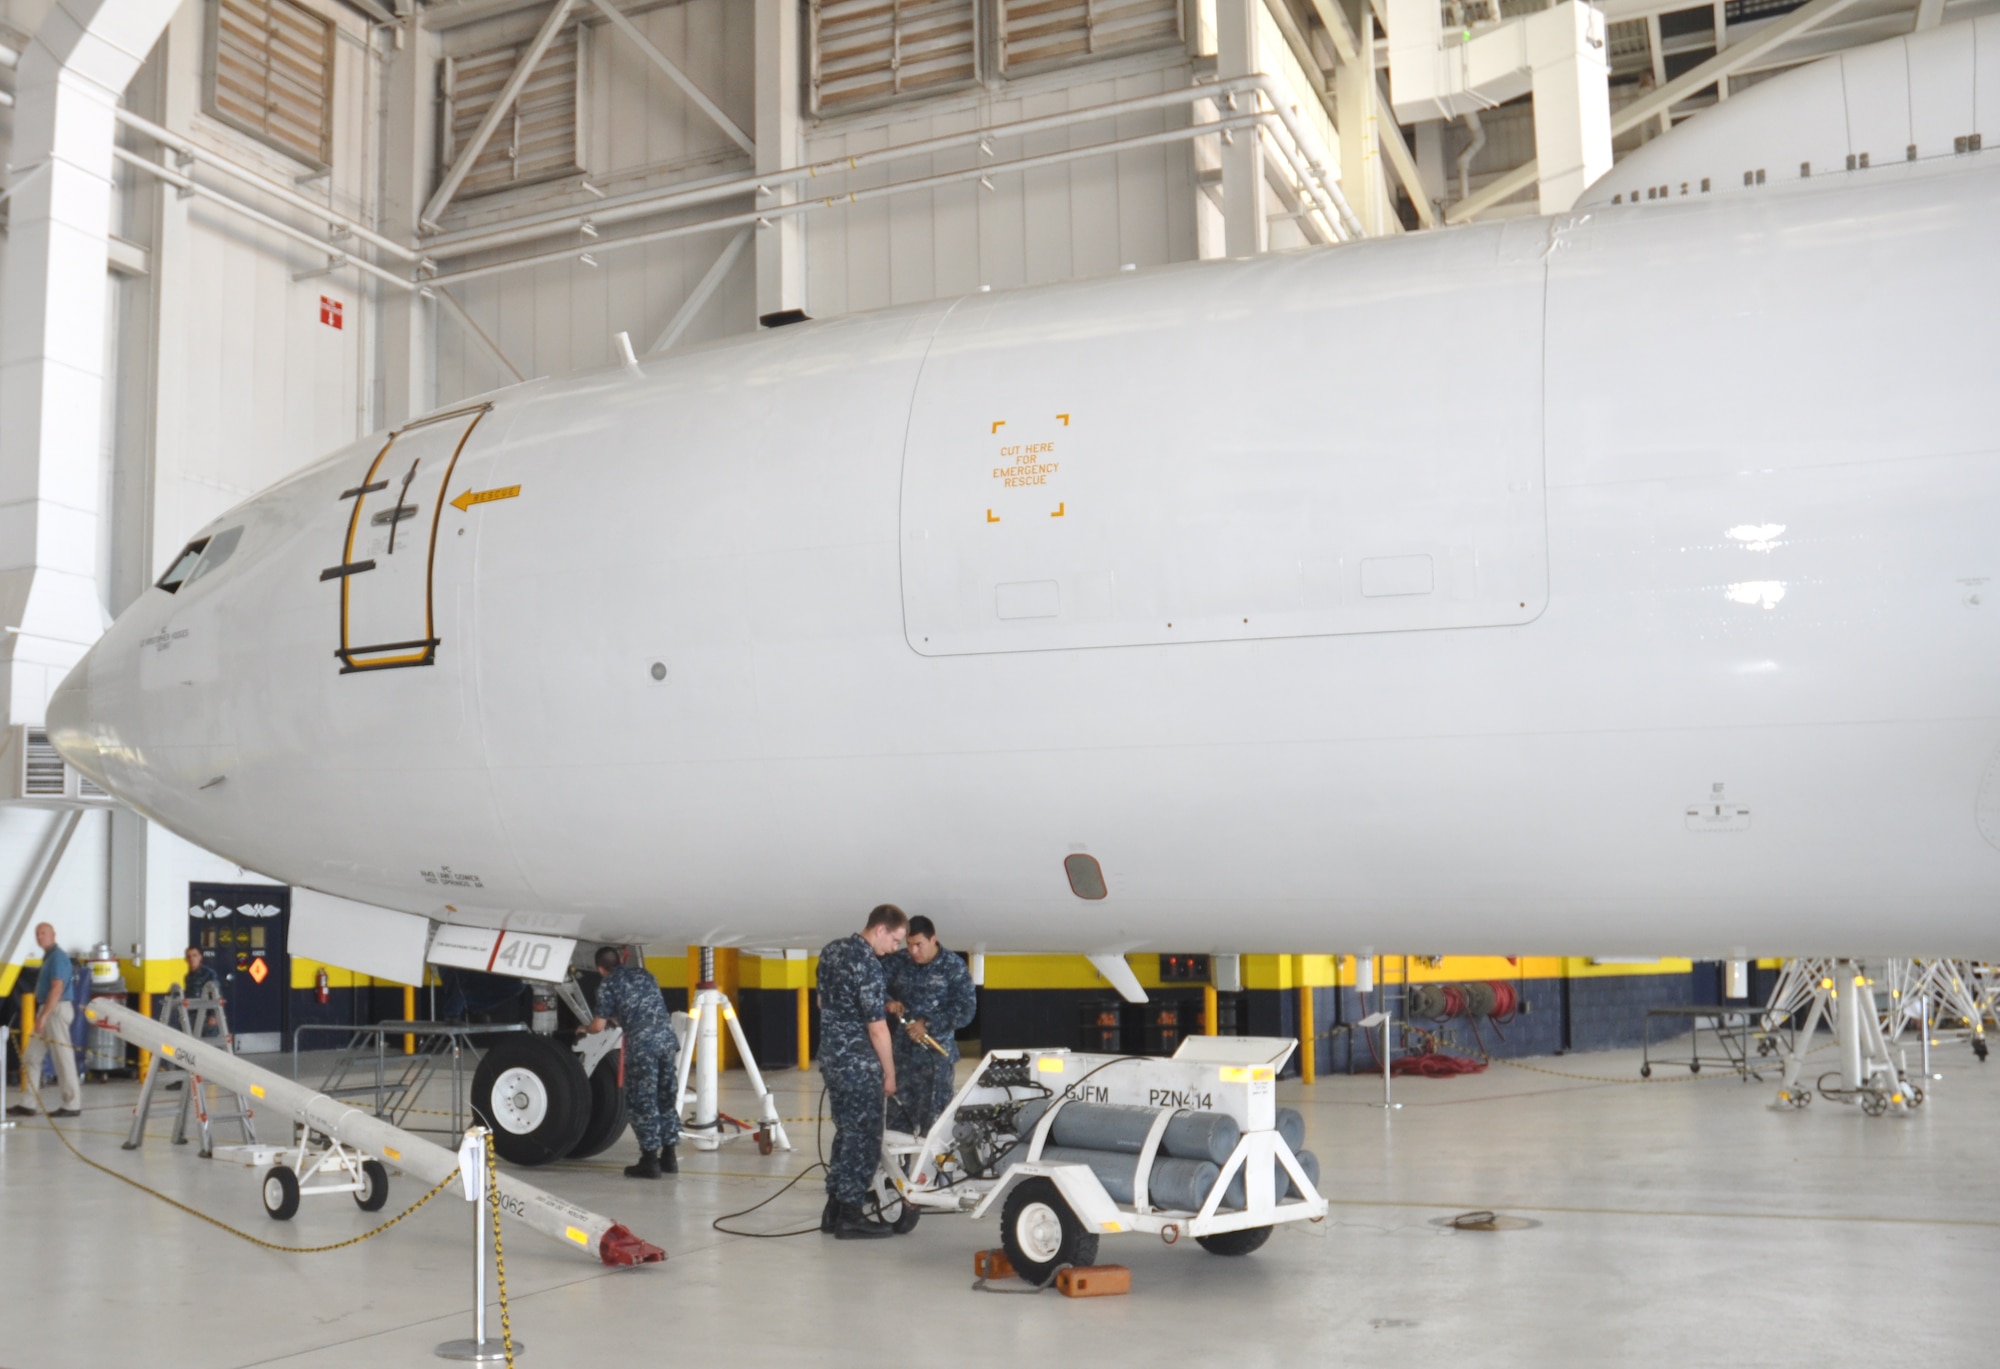 Navy personnel perform routine maintenance on an E-6B aircraft parked inside a TACAMO hangar at Tinker AFB. (Air Force photo by Mike W. Ray)